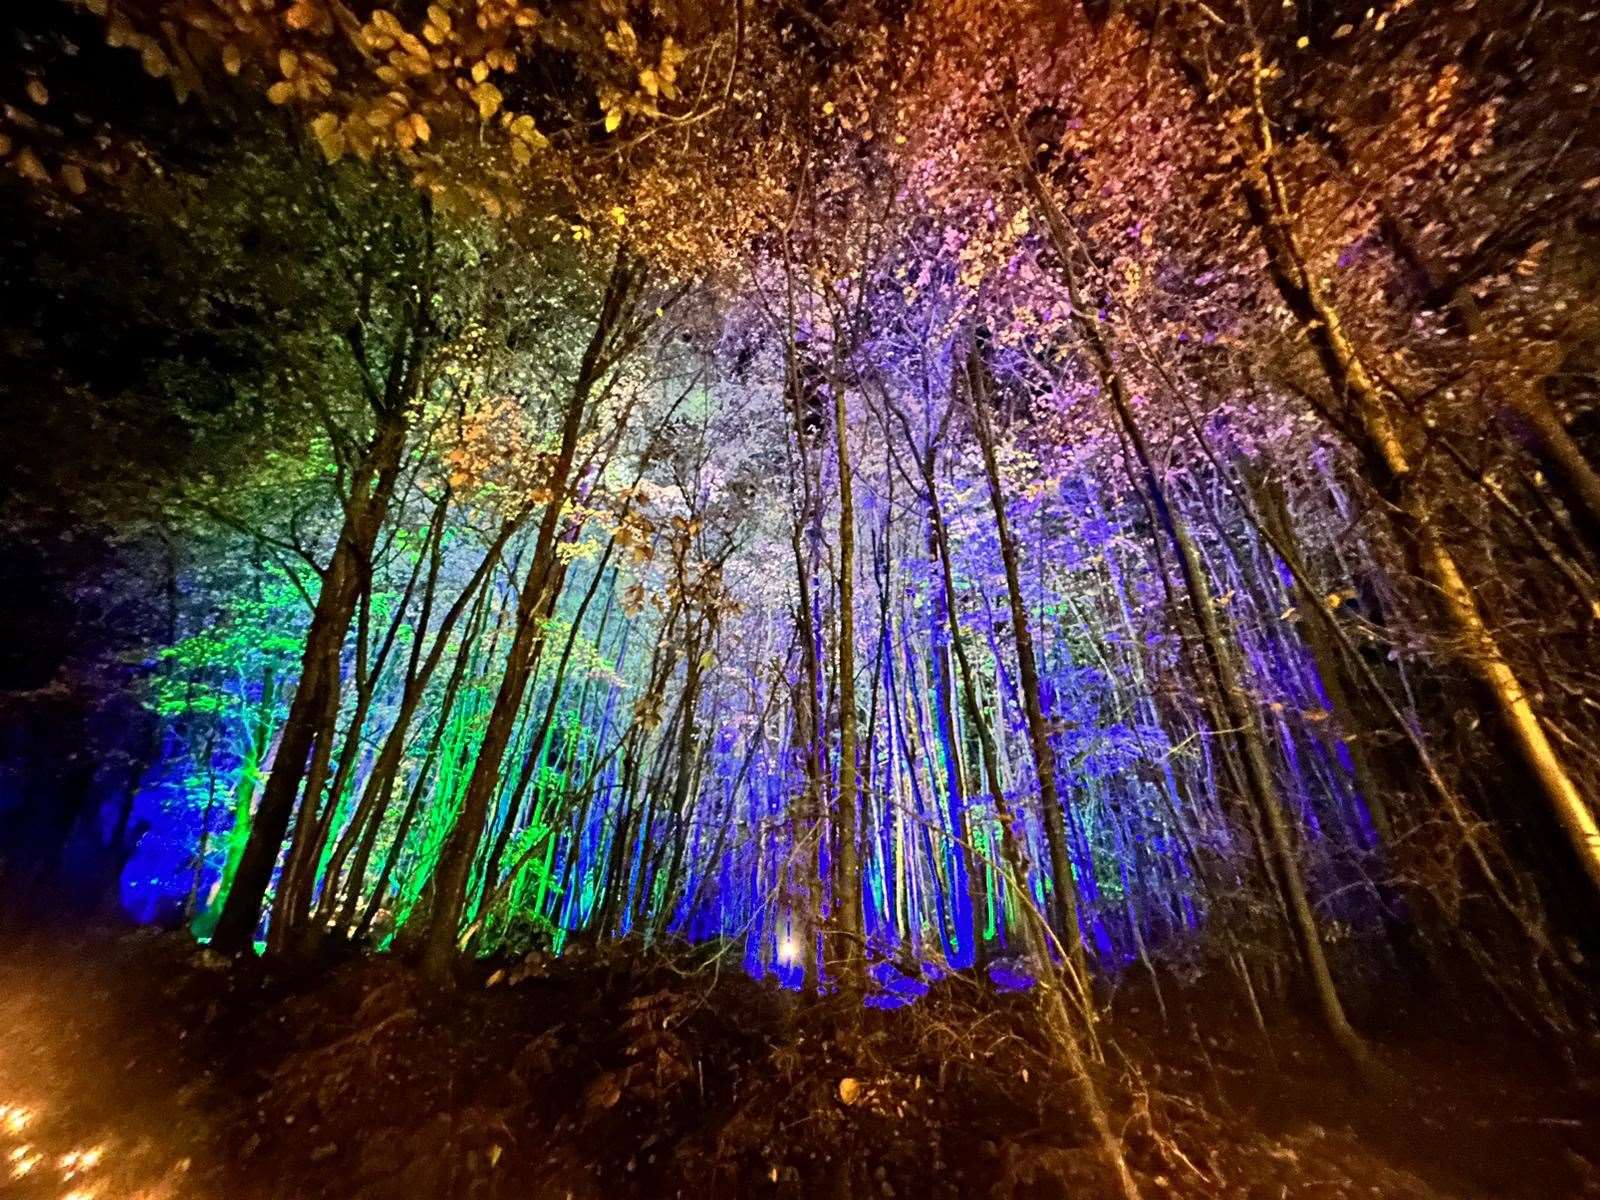 Trees lit up by lights at Bedgebury